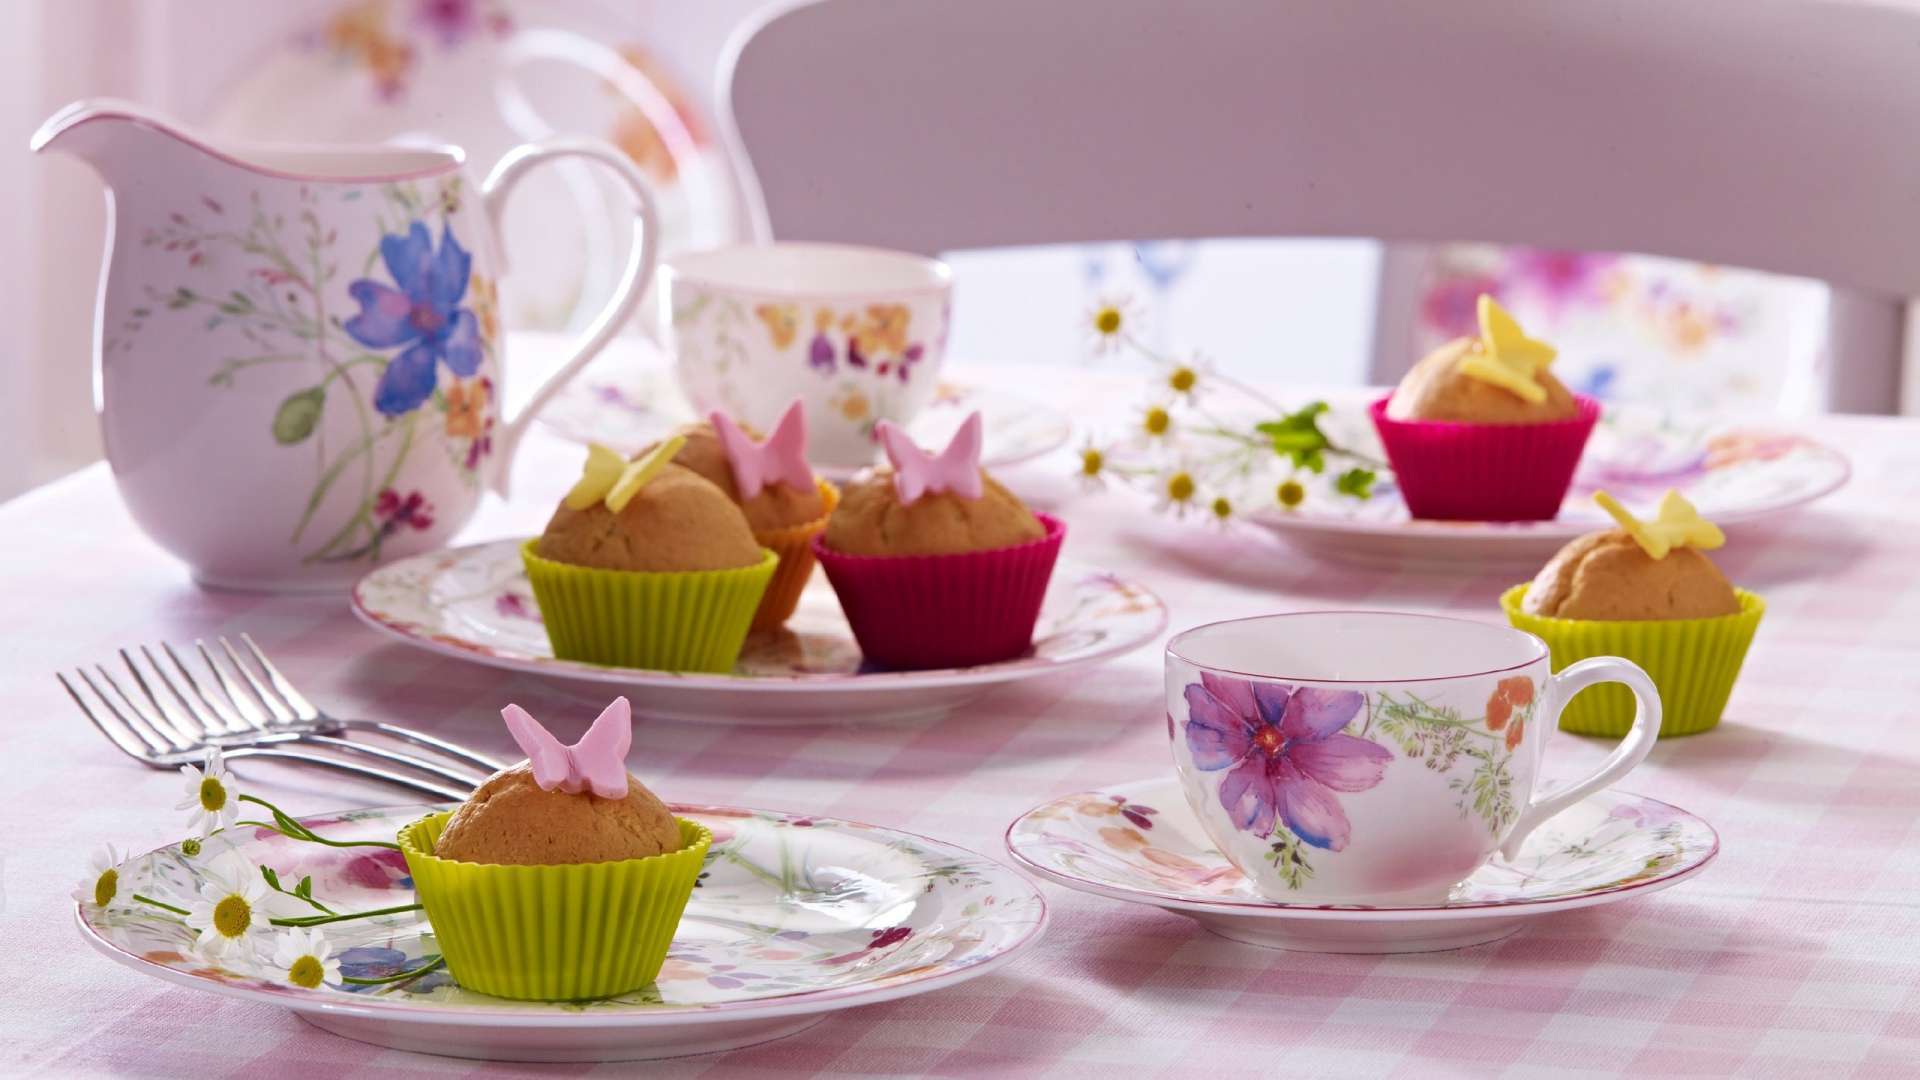 Wallpaper Desktop Tea Party Cups Dishes Sweets Cupcakes